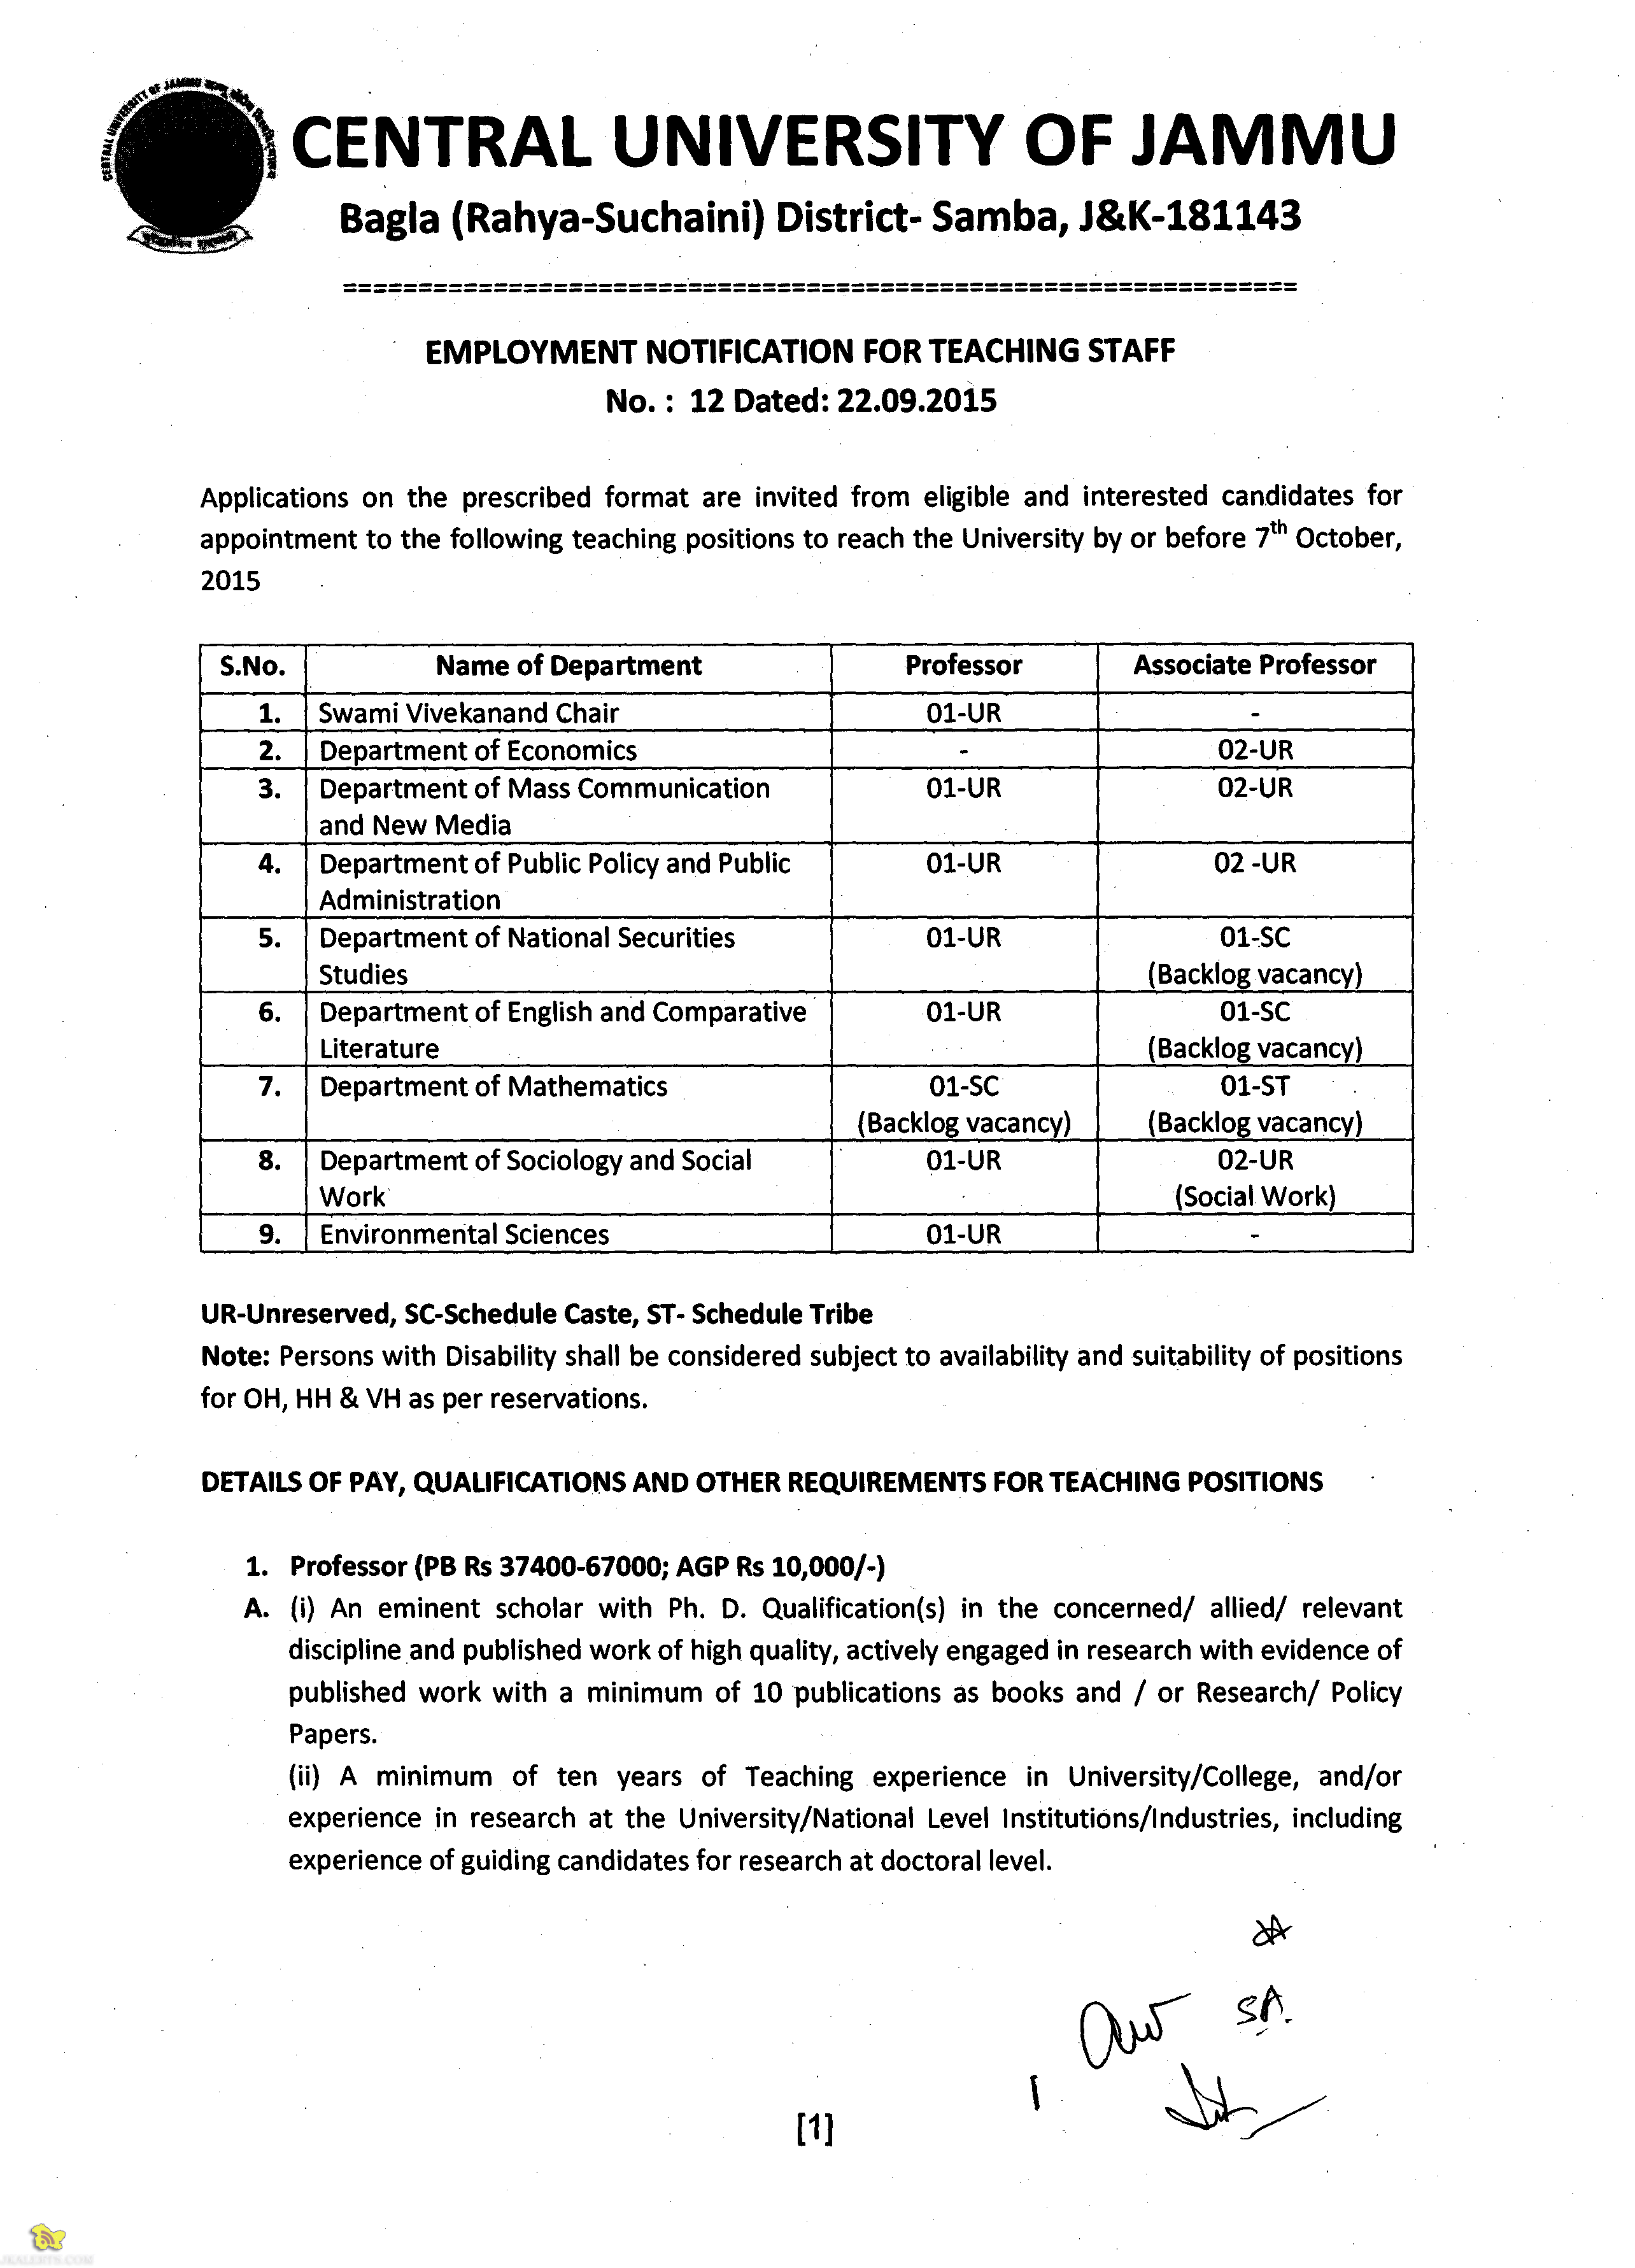 EMPLOYMENT NOTIFICATION FOR TEACHING STAFF IN CENTRAL UNIVERSITY OF JAMMU CUJ